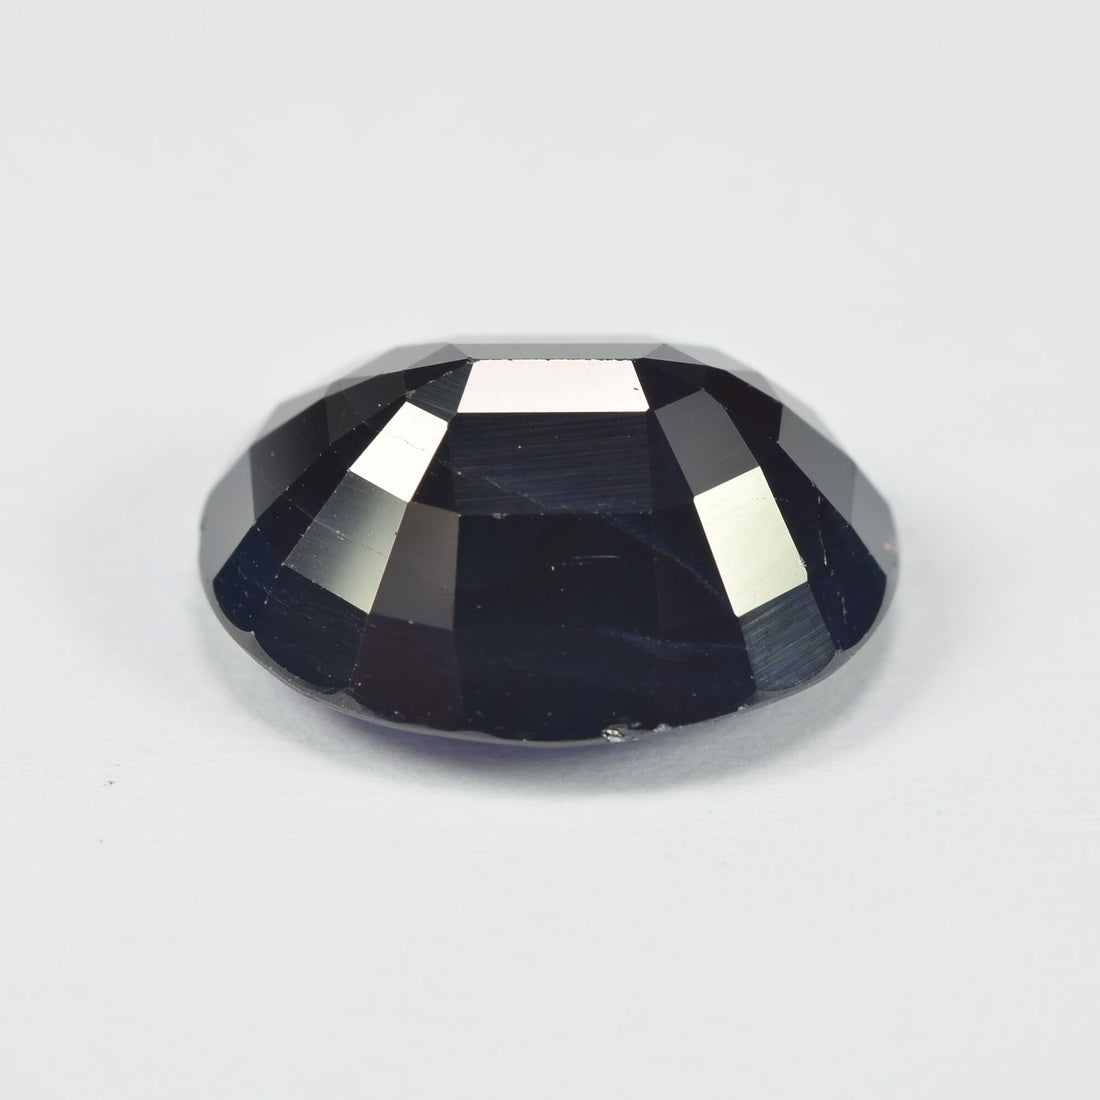 10.83 cts Natural Blue Sapphire Loose Gemstone Oval Cut